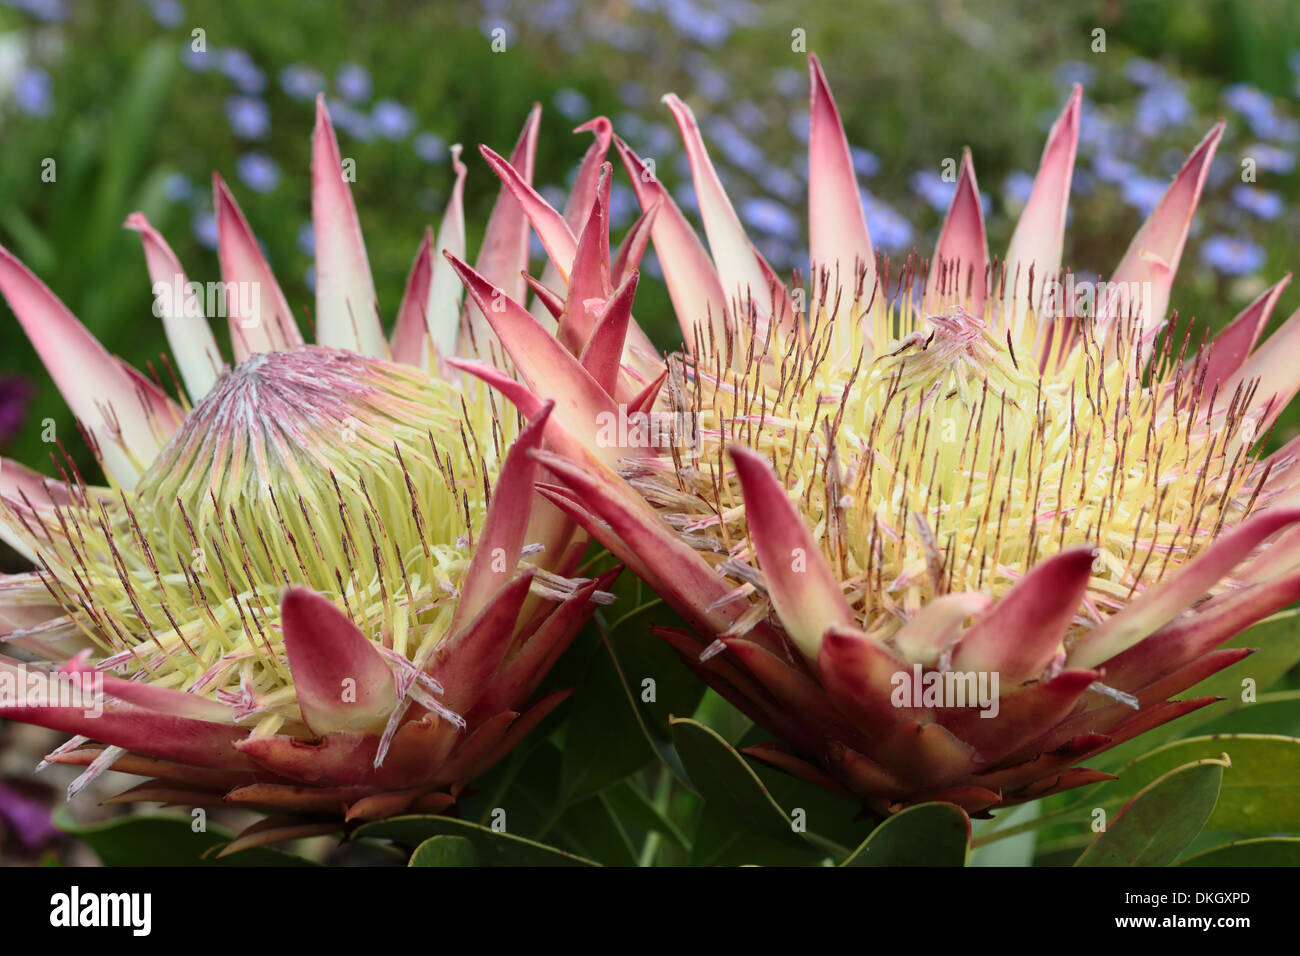 Protea cynaroides (national flower of South Africa) in bloom, Hermanus, South Africa Stock Photo